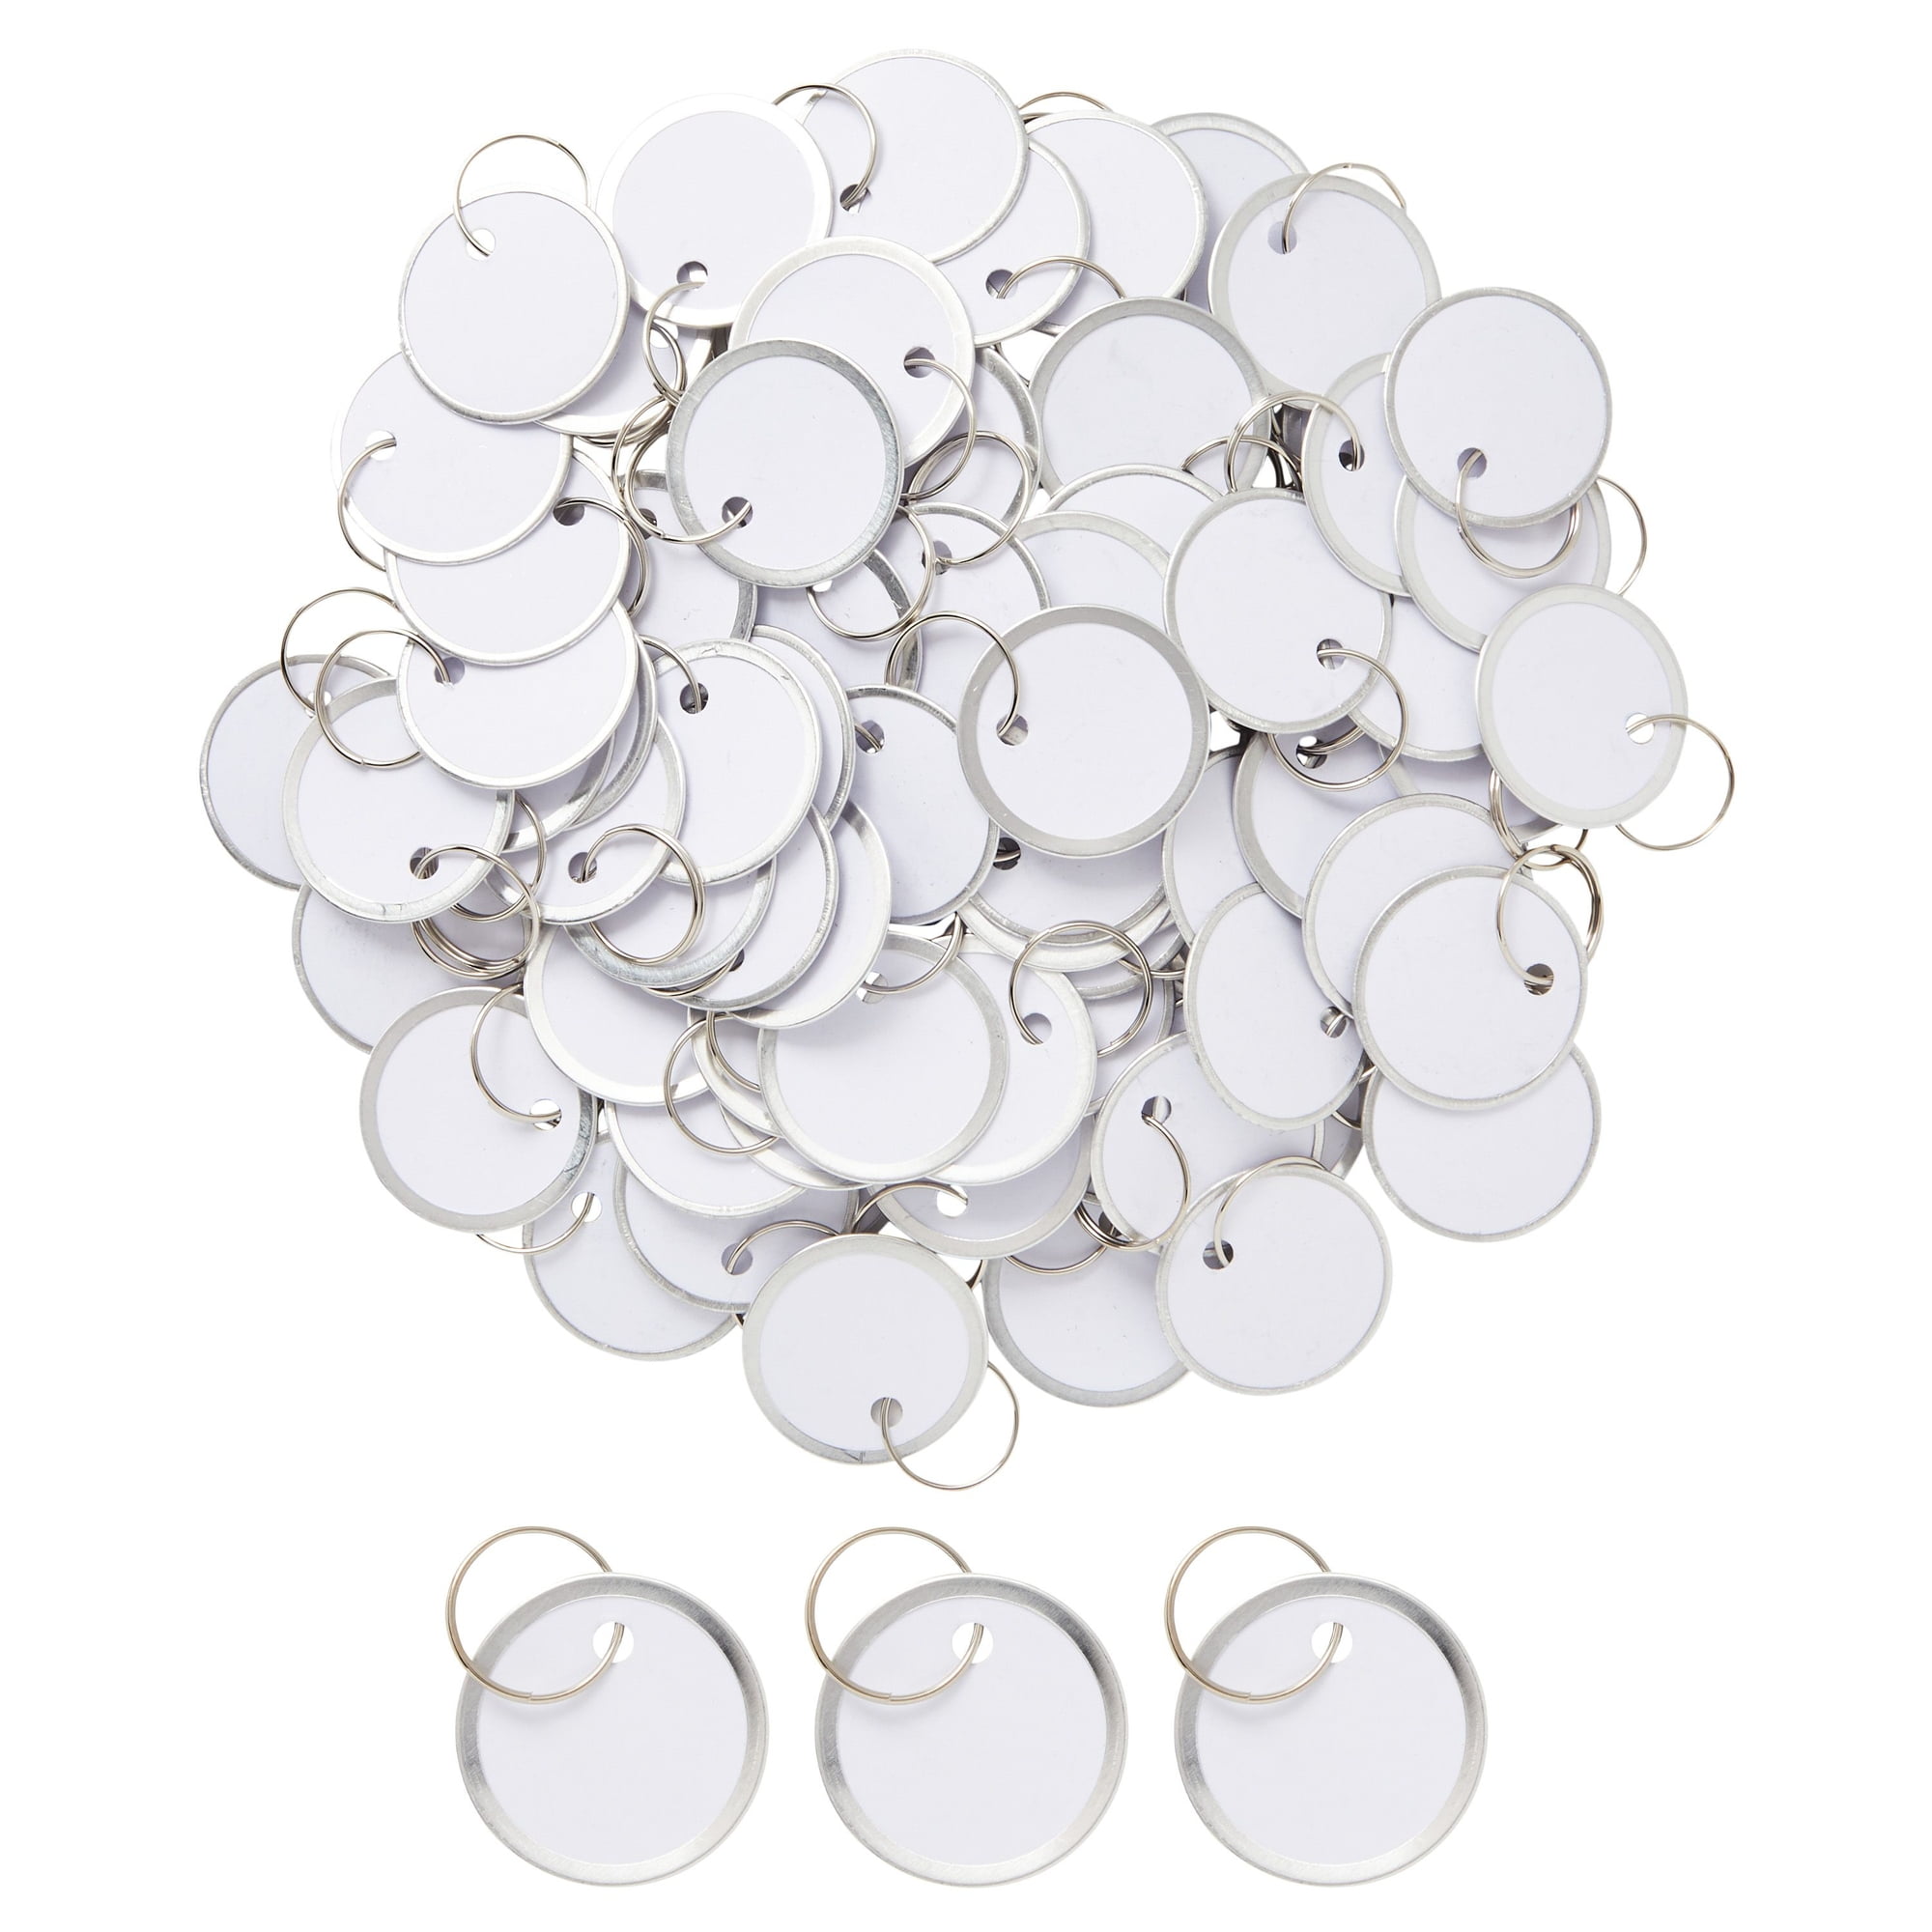 500 Pieces Metal Rim Key Tags 1.25 Inches Round Key Labels Diameter Round  Paper Key Tags with Metal Split Rings Key Tags Keyrings Bulk for Car Door